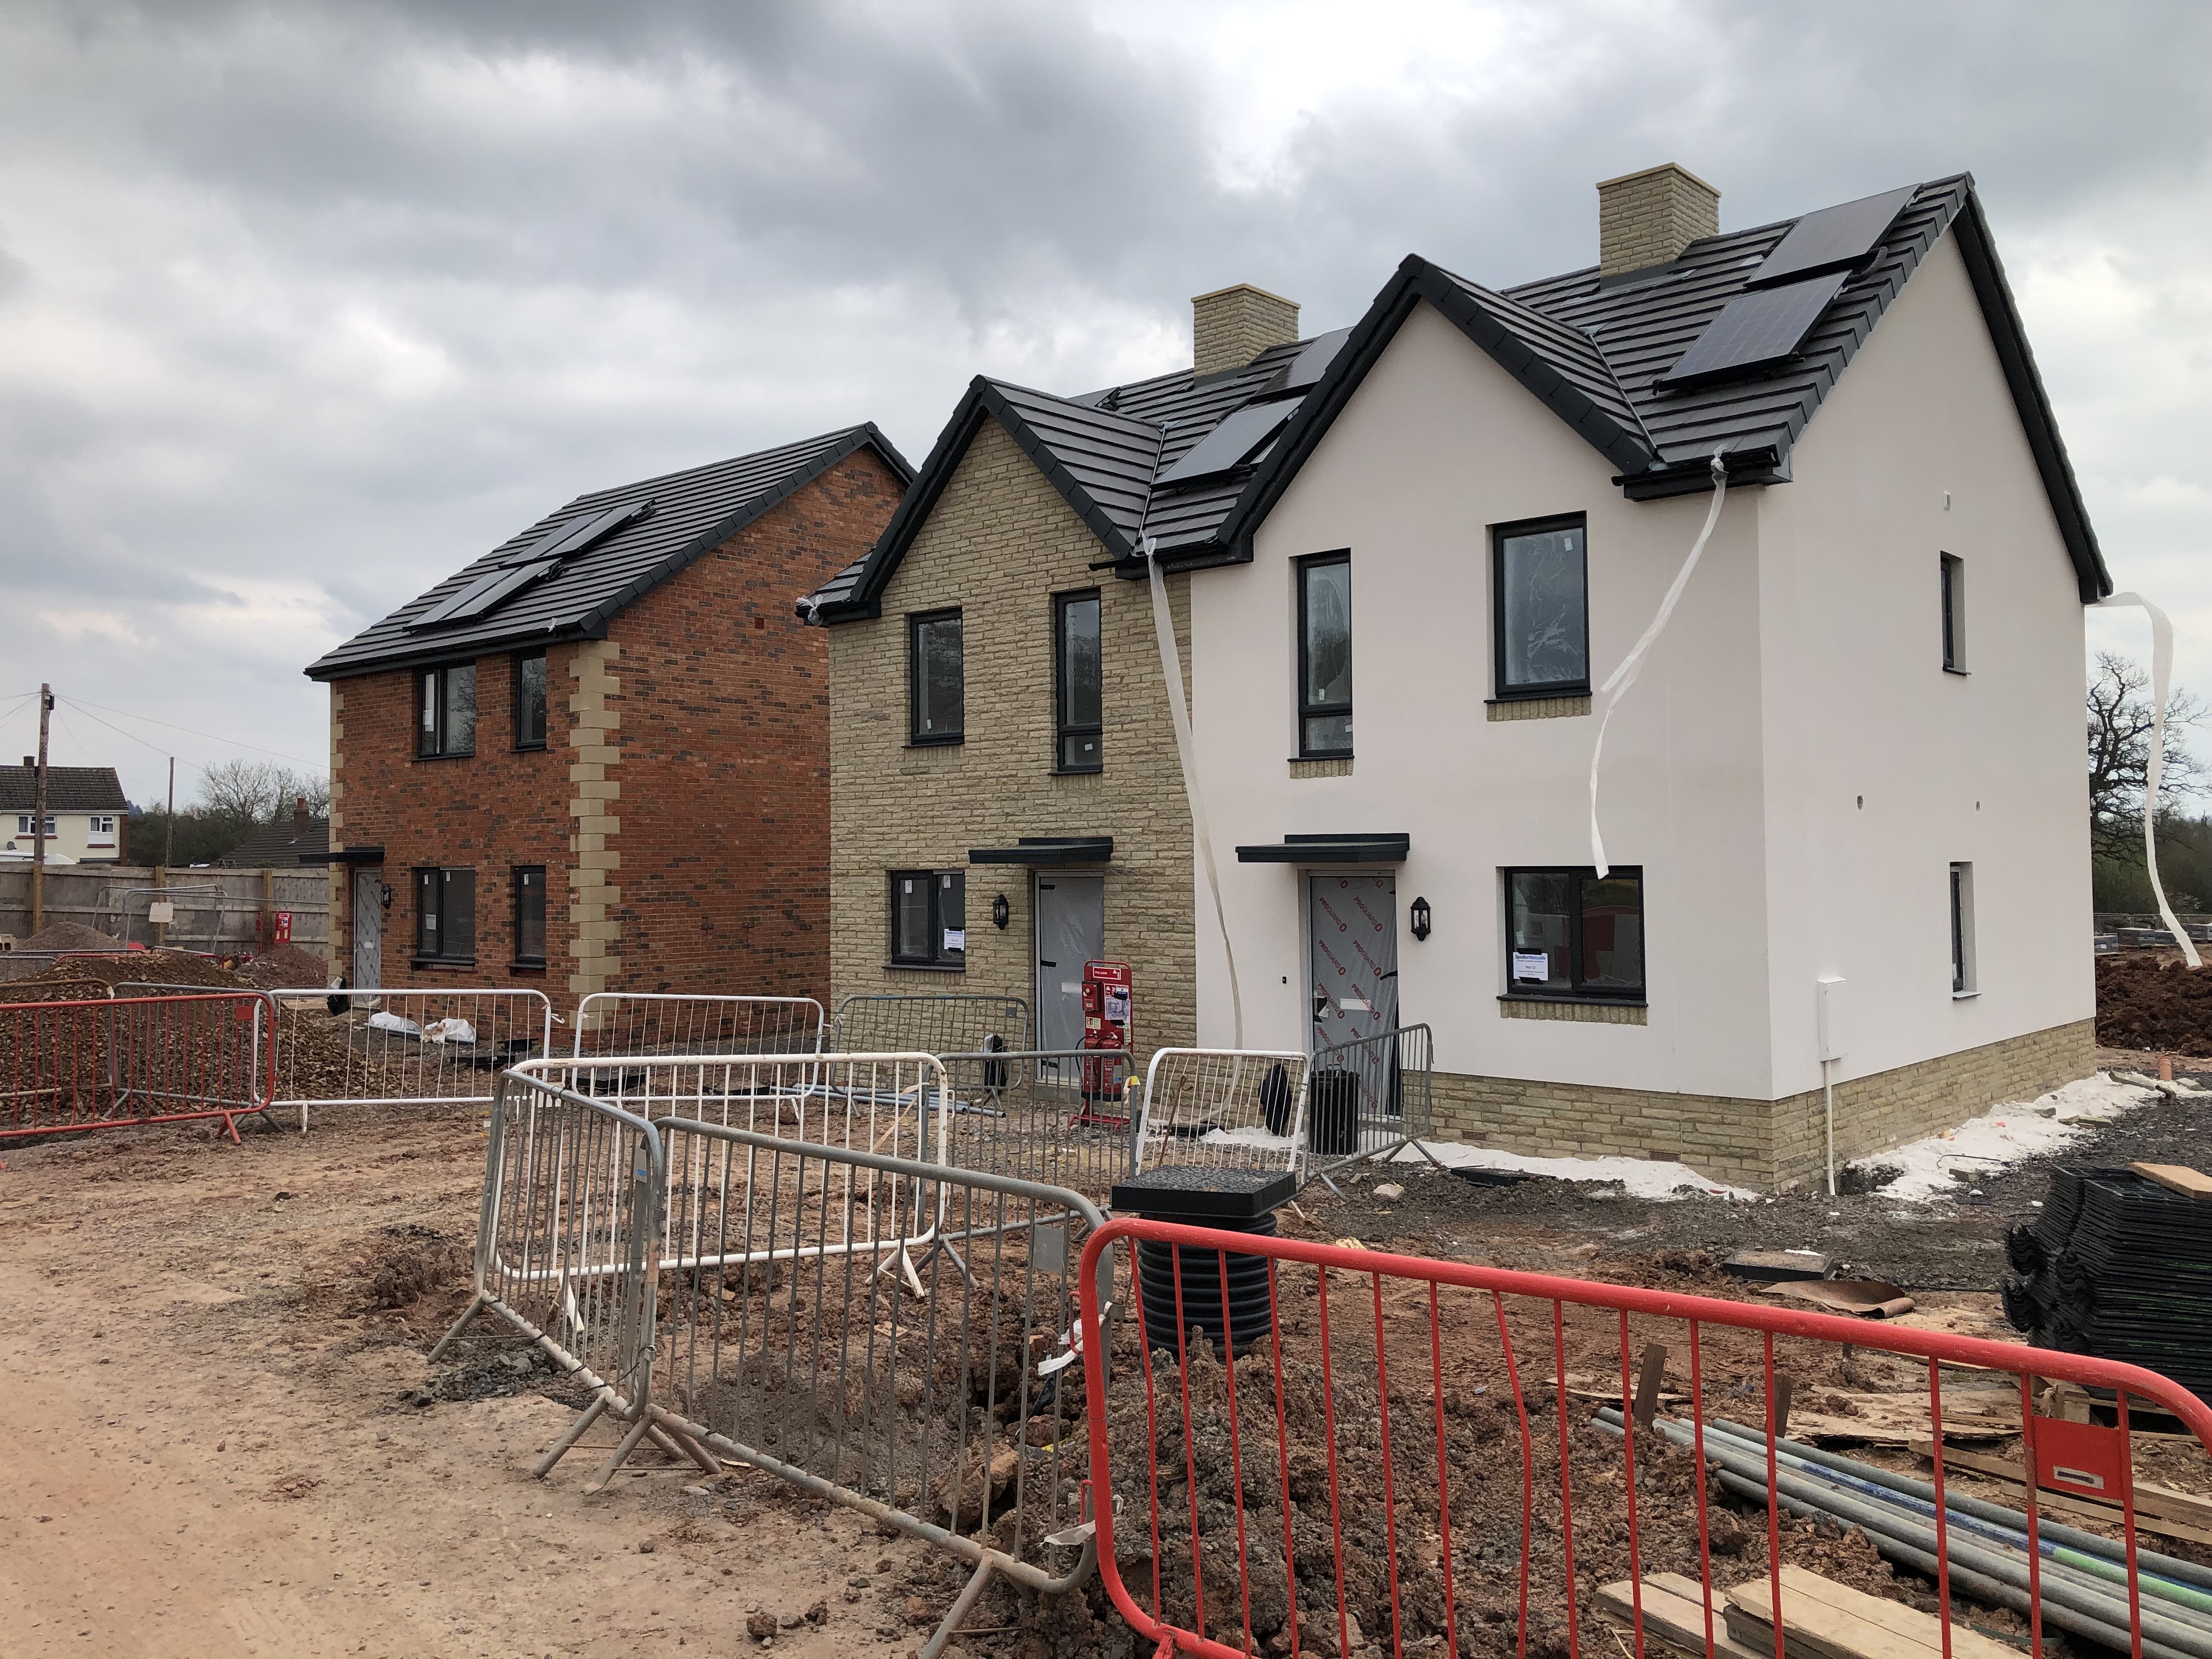 Three new-build houses near-completion on building site